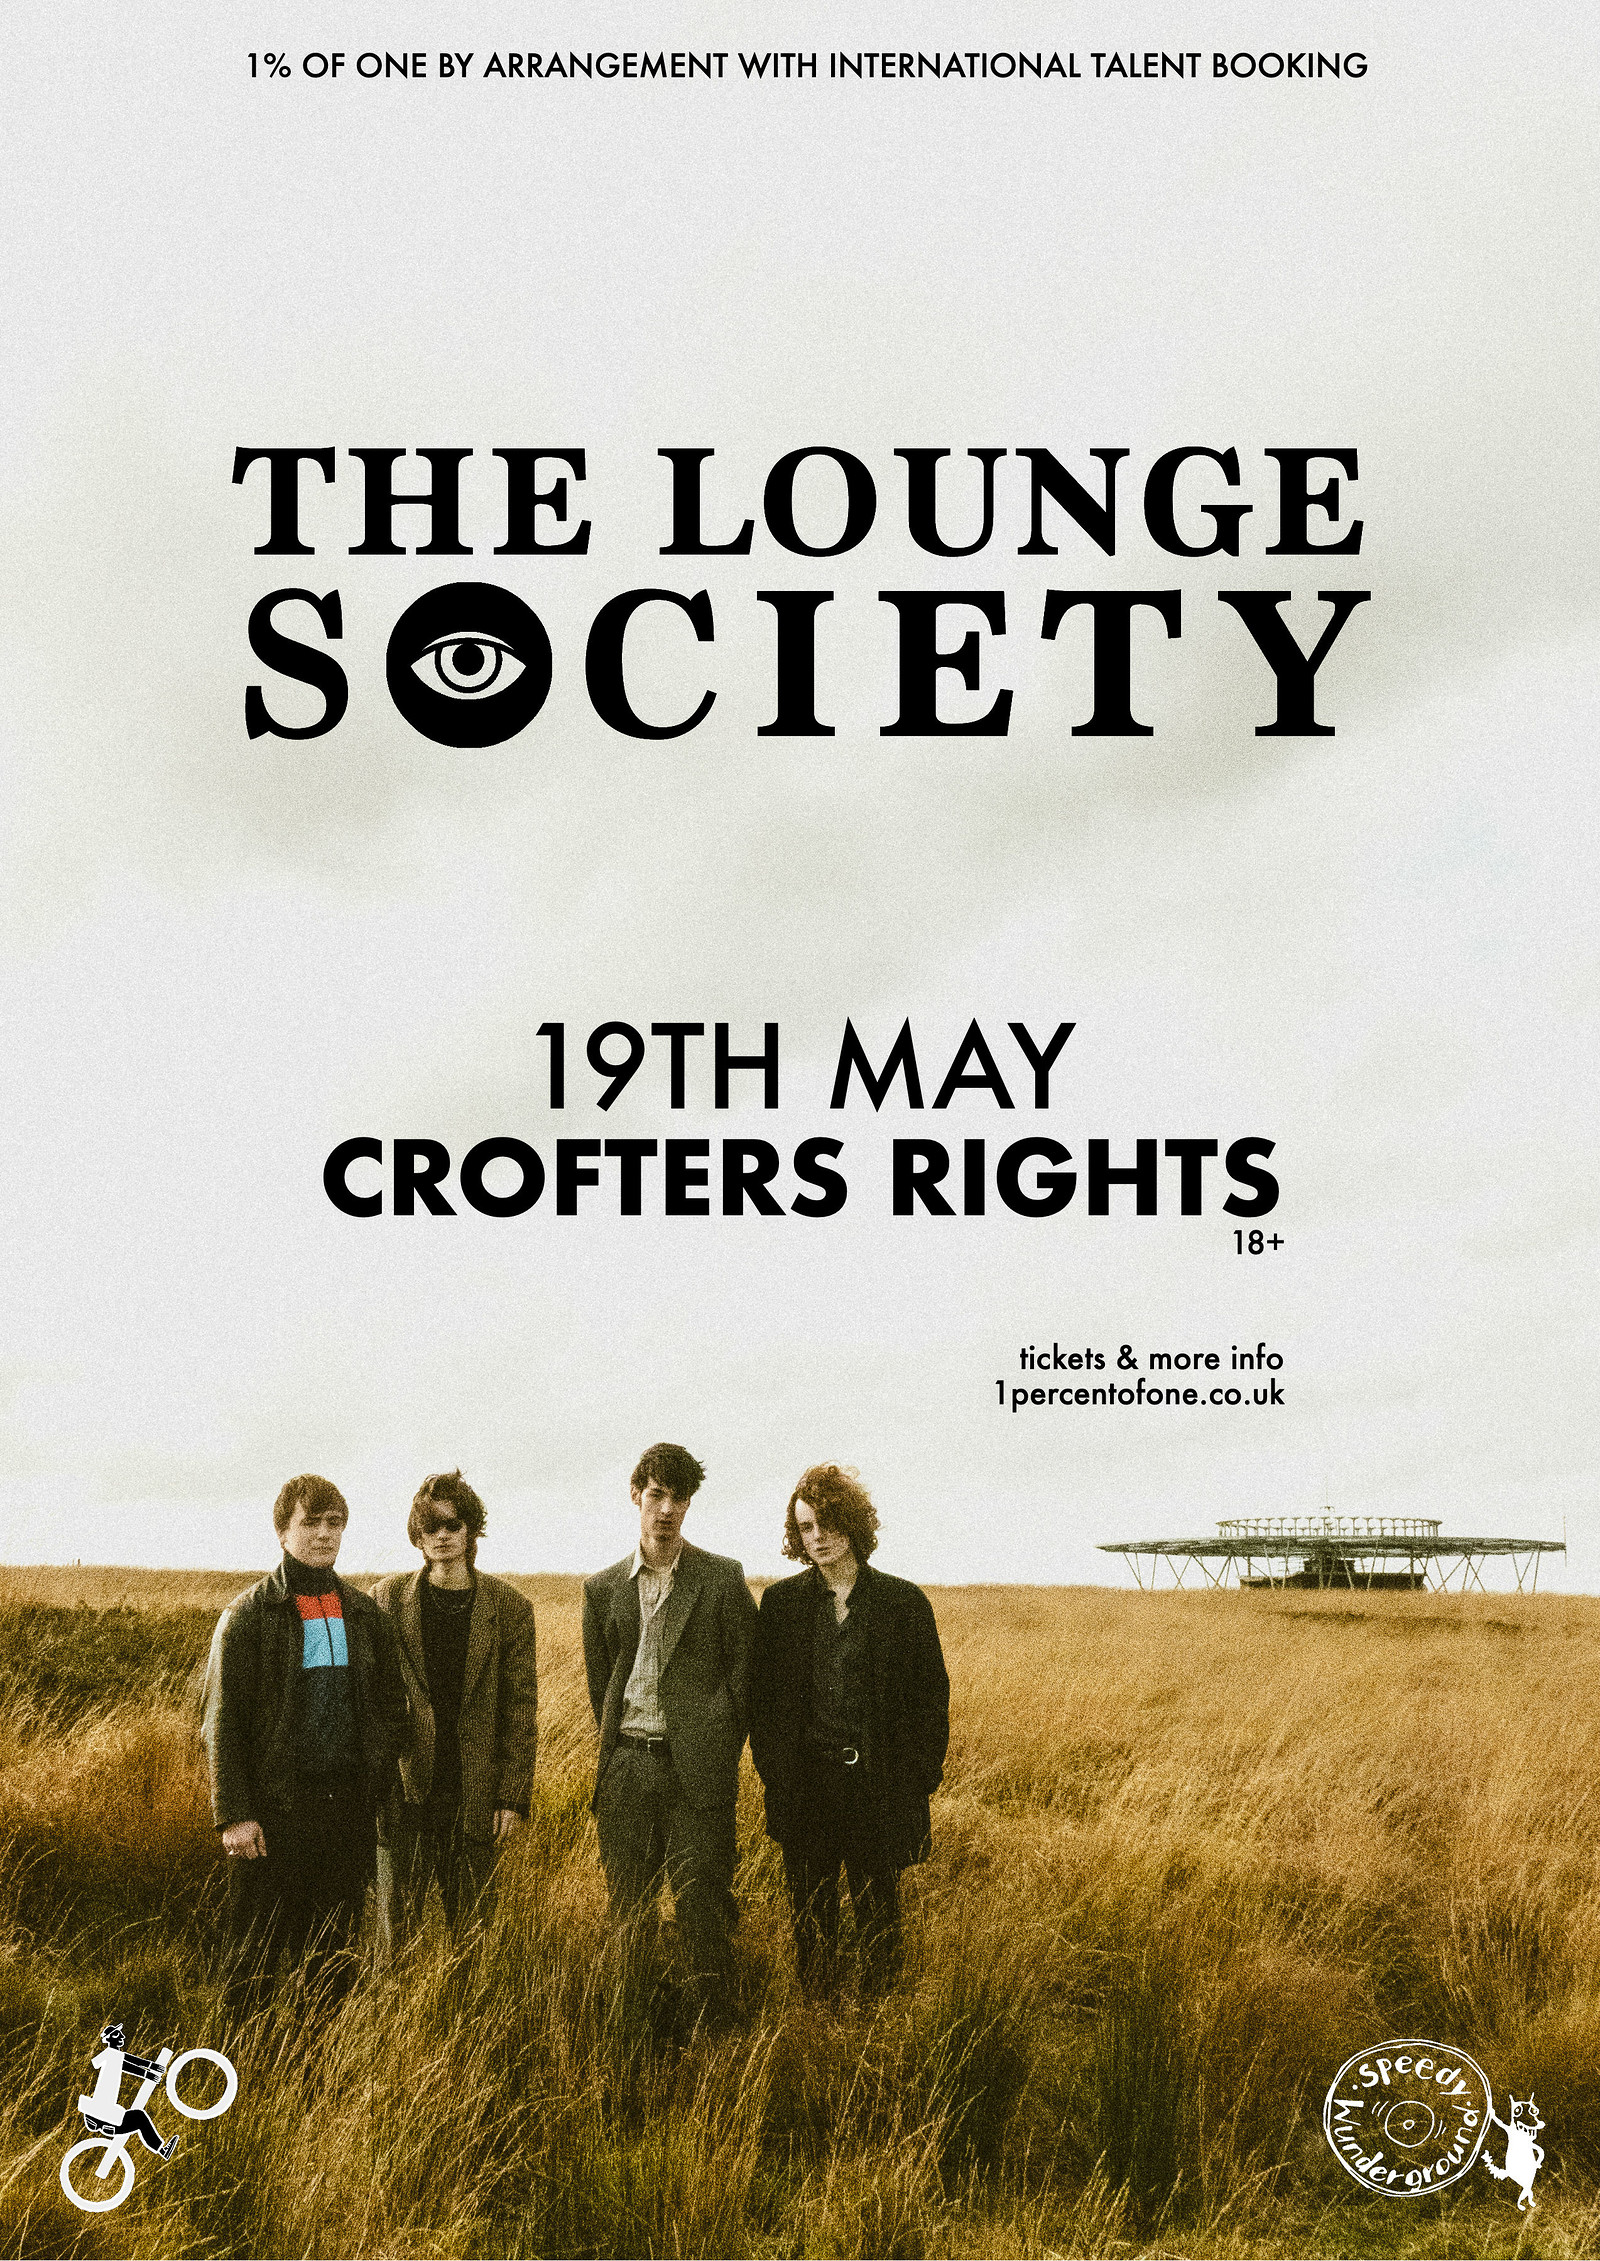 The Lounge Society at Crofters Rights